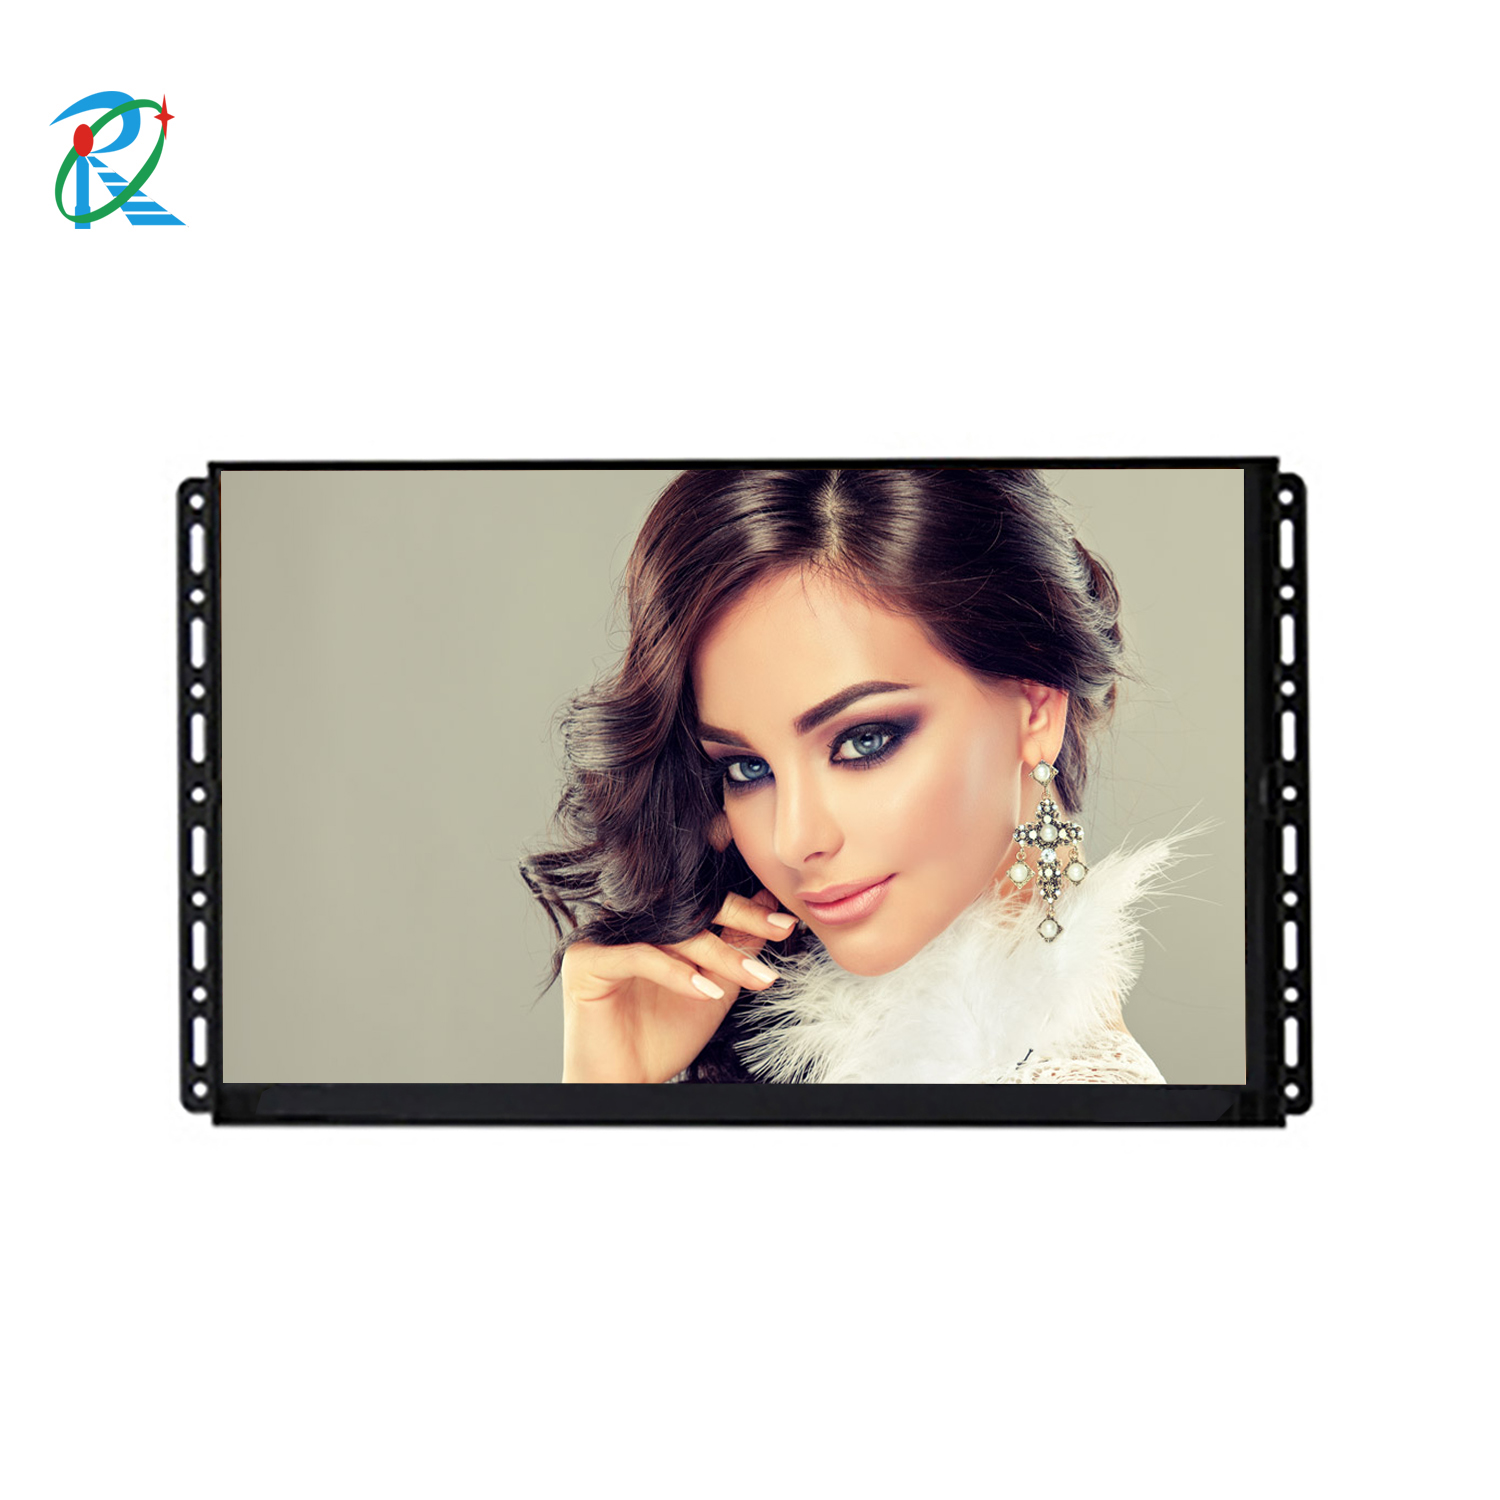 RS215NET-N10 21.5 open frame lcd monitor for window display